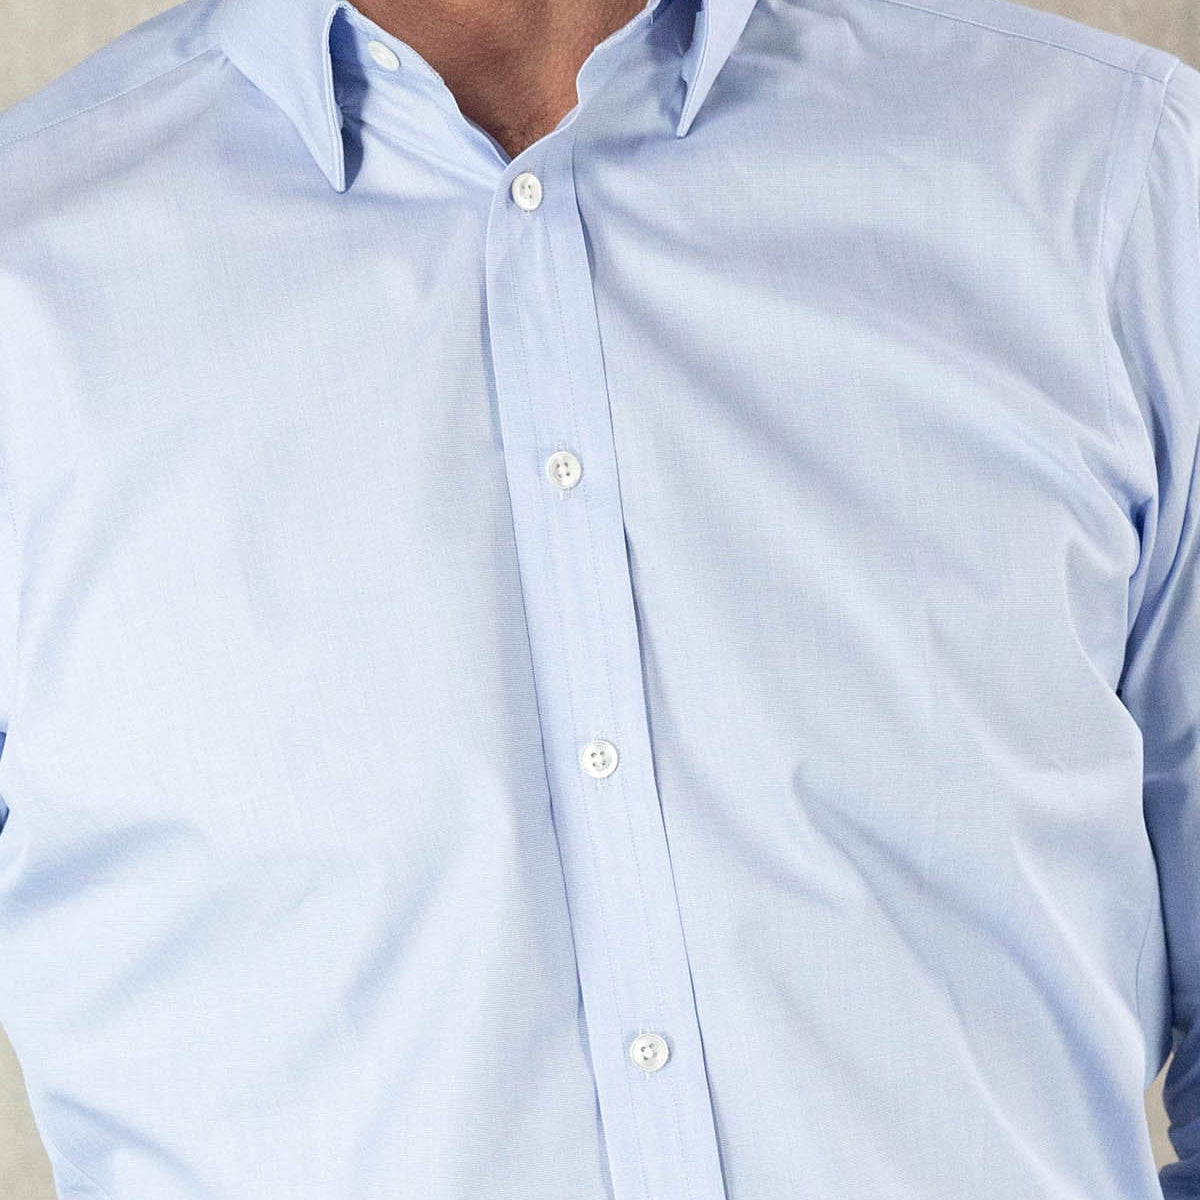 Contemporary Fit, Concealed Button Down Collar, Two Button Cuff Shirt In Plain Blue - Hilditch & Key